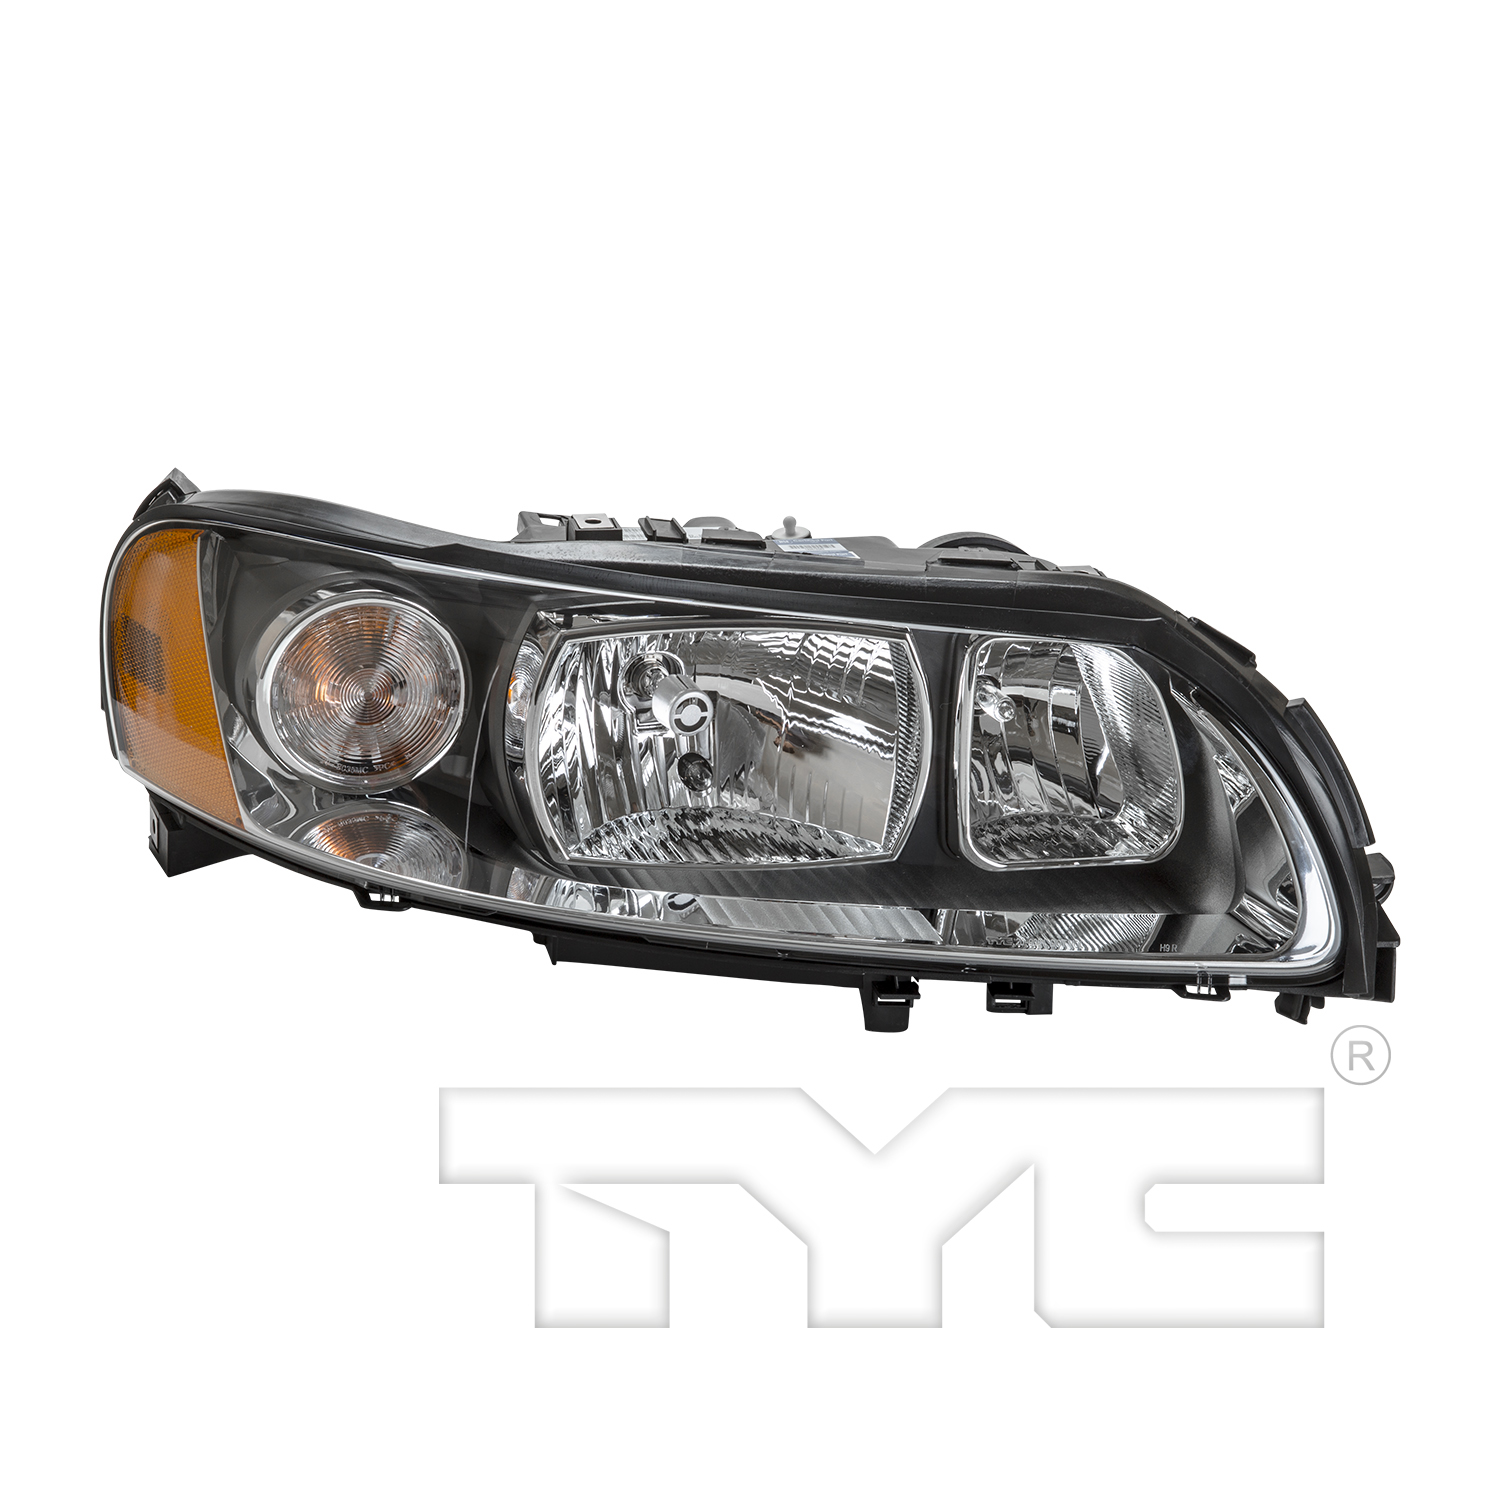 Aftermarket HEADLIGHTS for VOLVO - XC70, XC70,05-07,RT Headlamp assy composite